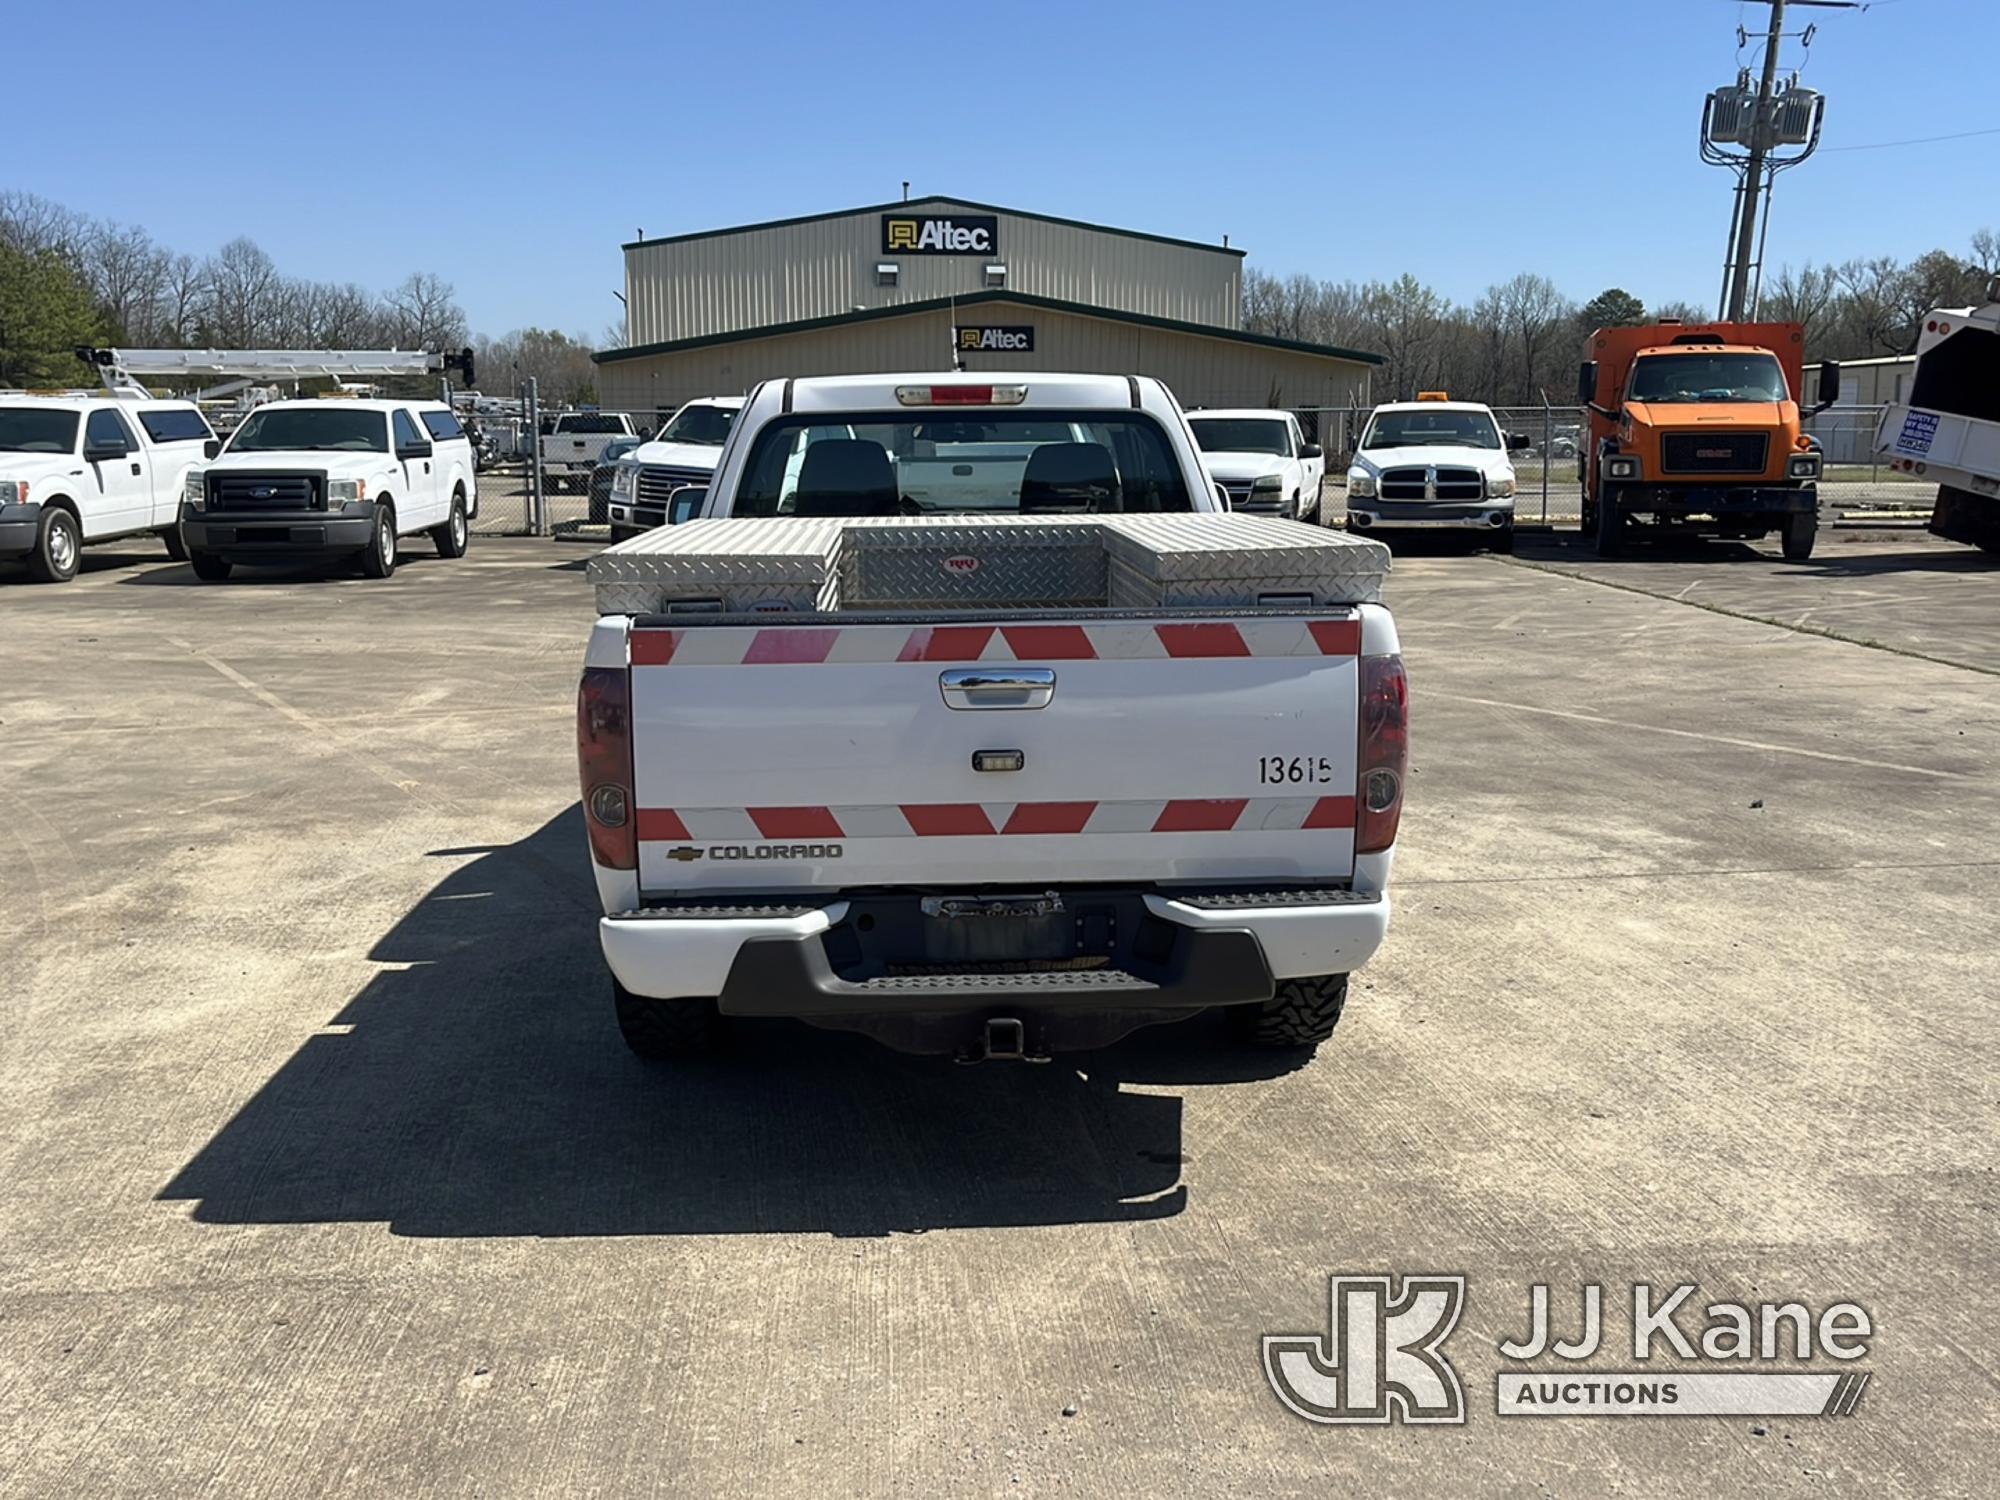 (Conway, AR) 2012 Chevrolet Colorado 4x4 Extended-Cab Pickup Truck Runs & Moves) (Jump To Start